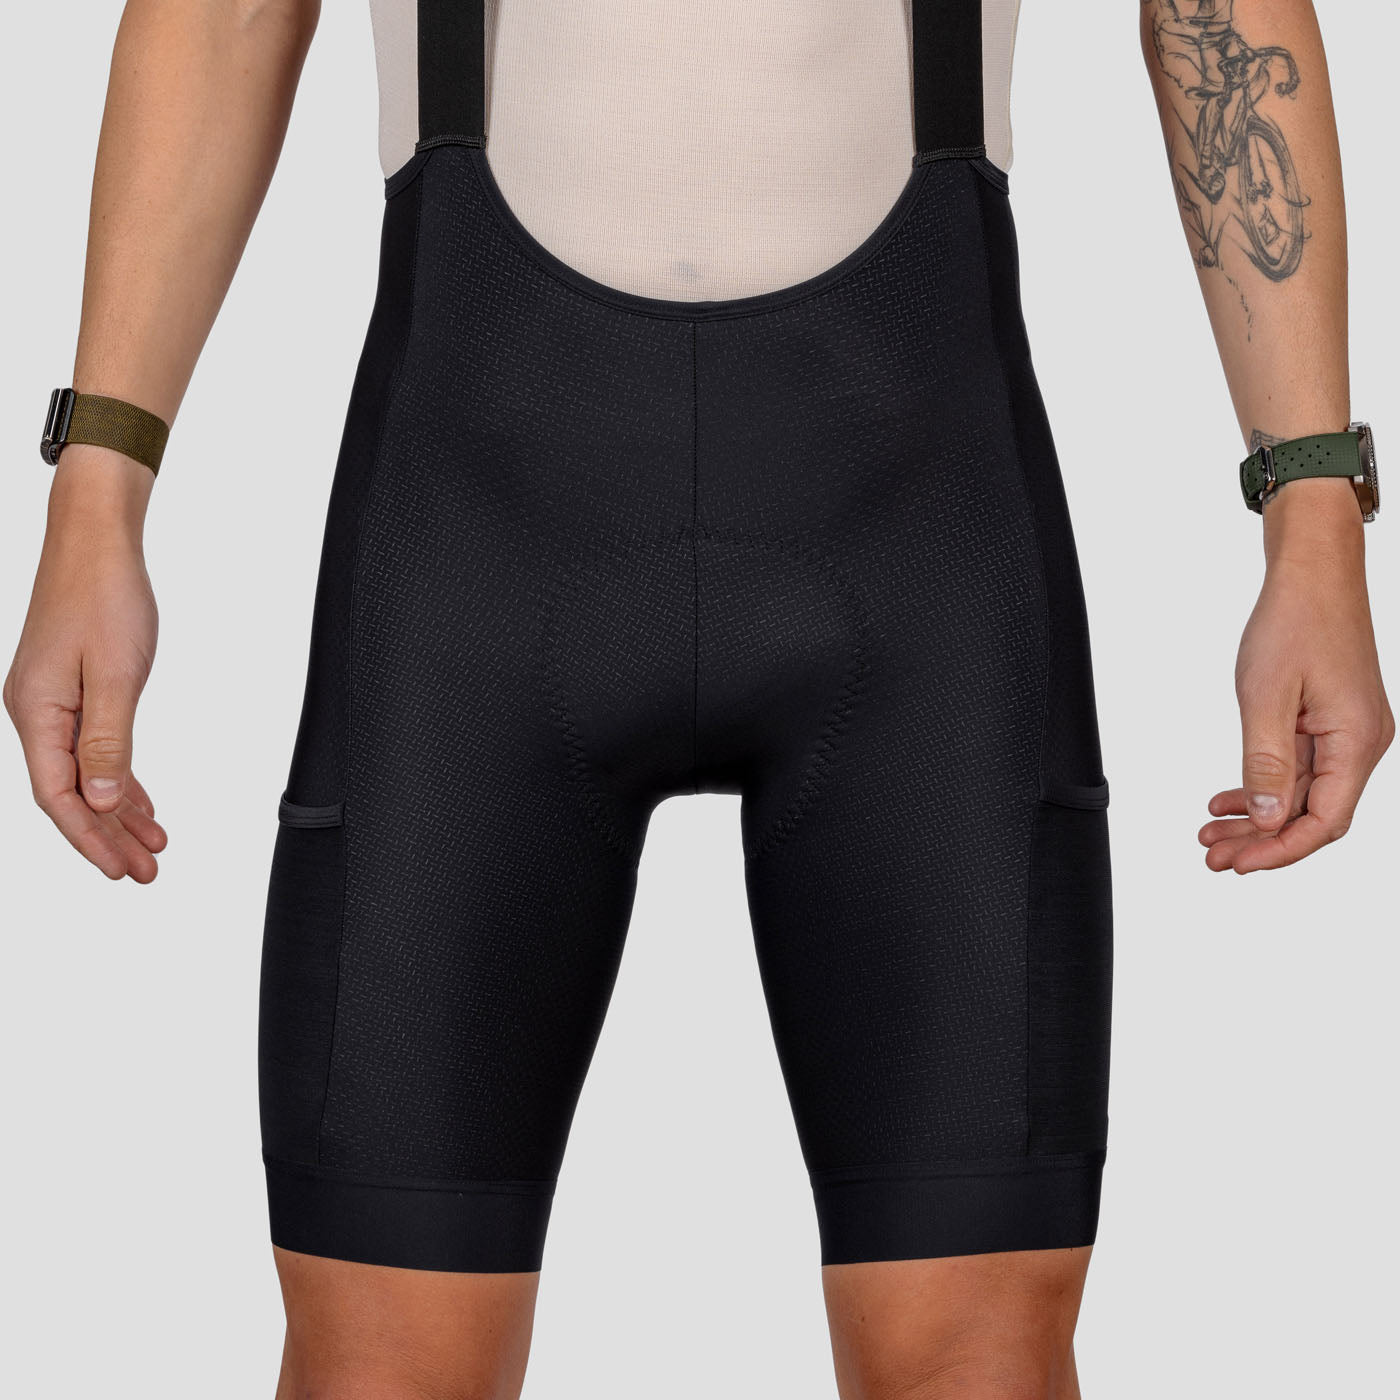 How to Buy Cycling Shorts and Bibs